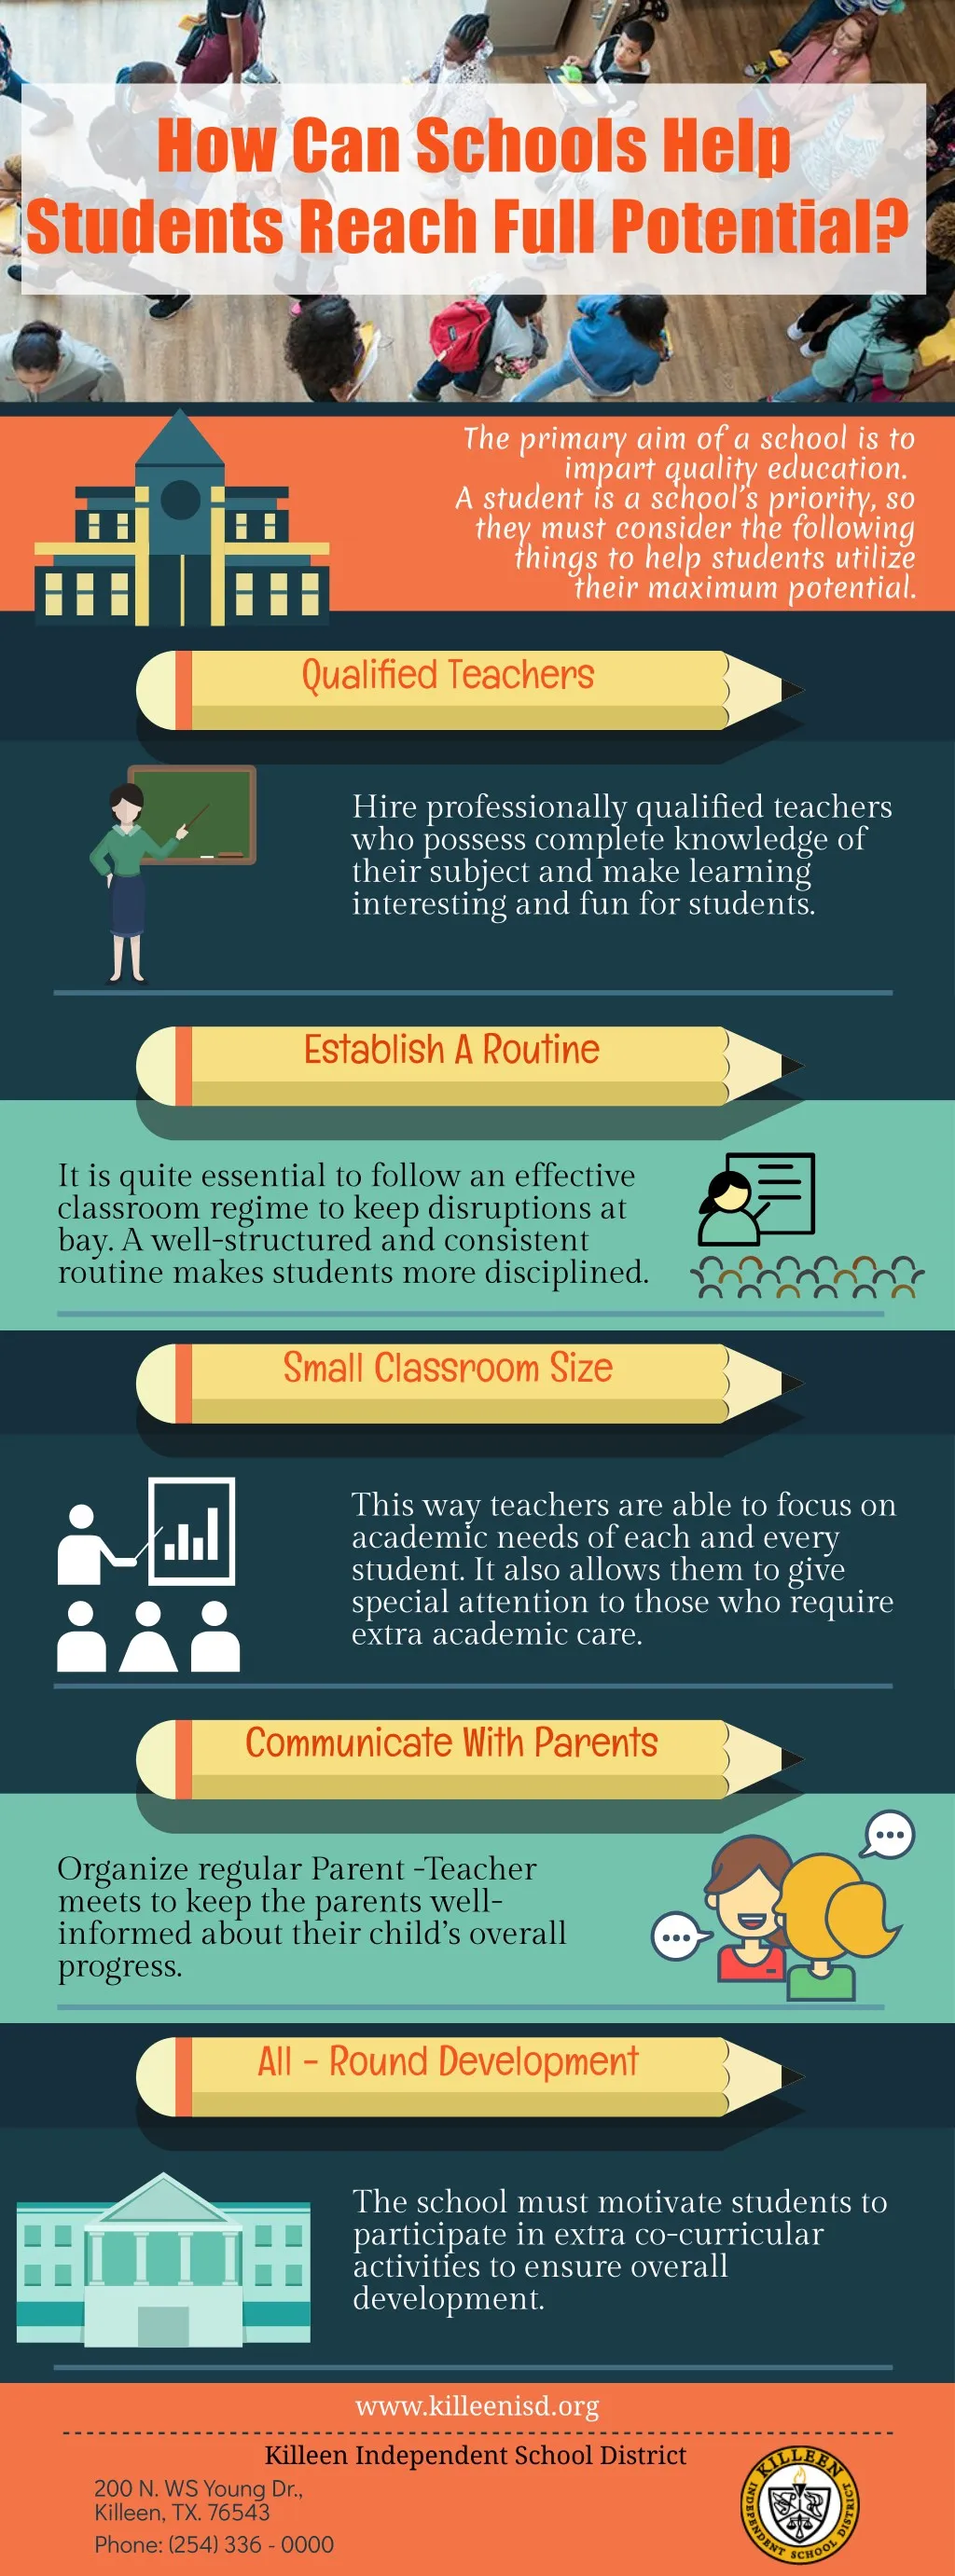 how can schools help students reach full potential